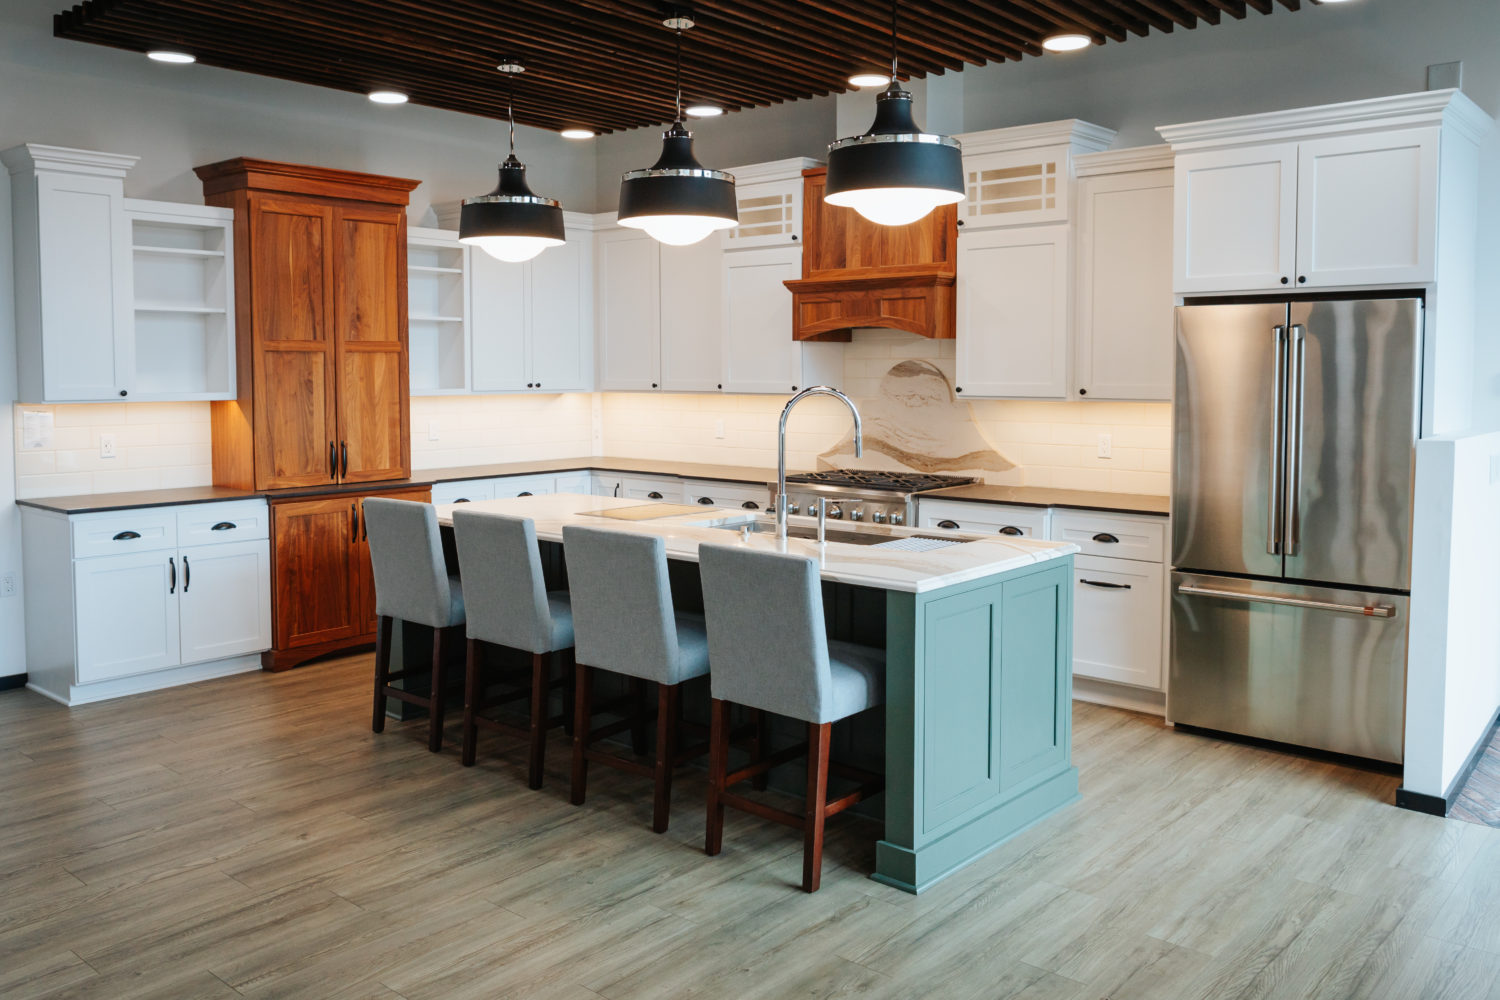 Multiple cabinet tones adds dimension to the kitchen.